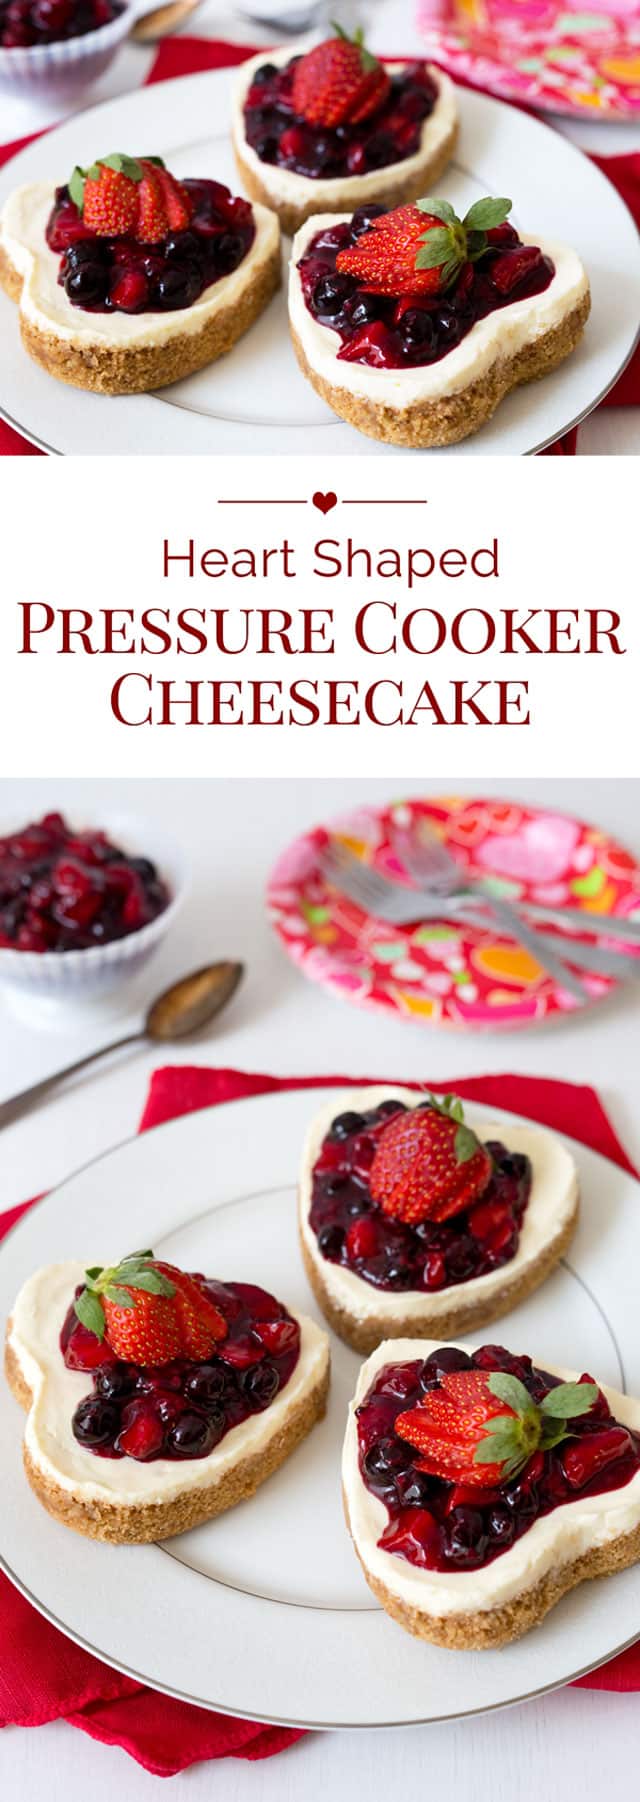 /Heart-Shaped-Pressure-Cooker-Cheesecake-Collage-Pressure-Cooking-Today